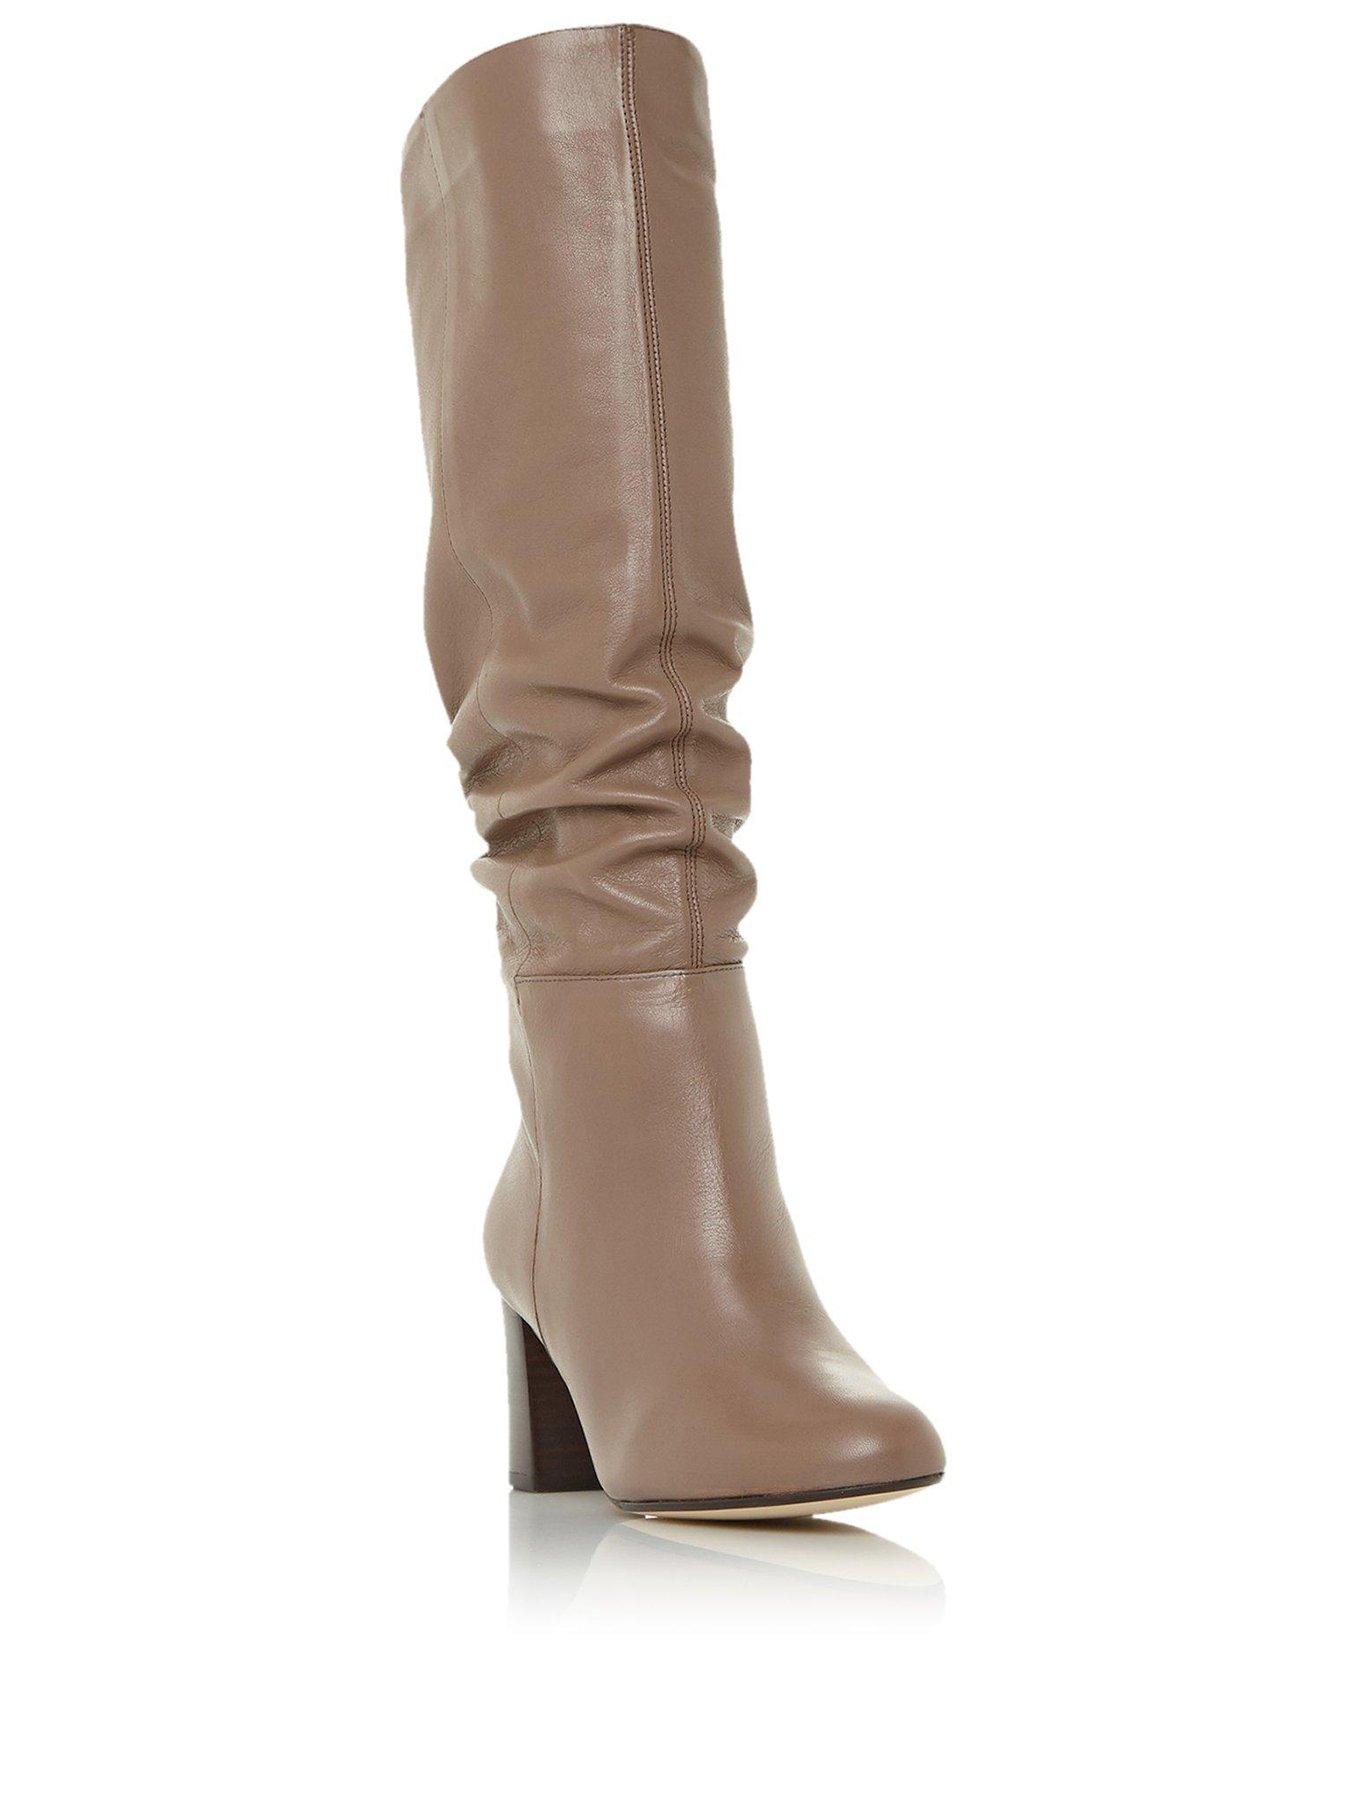 Women Silene Leather Ruched Block Heeled Knee High Boots - Taupe